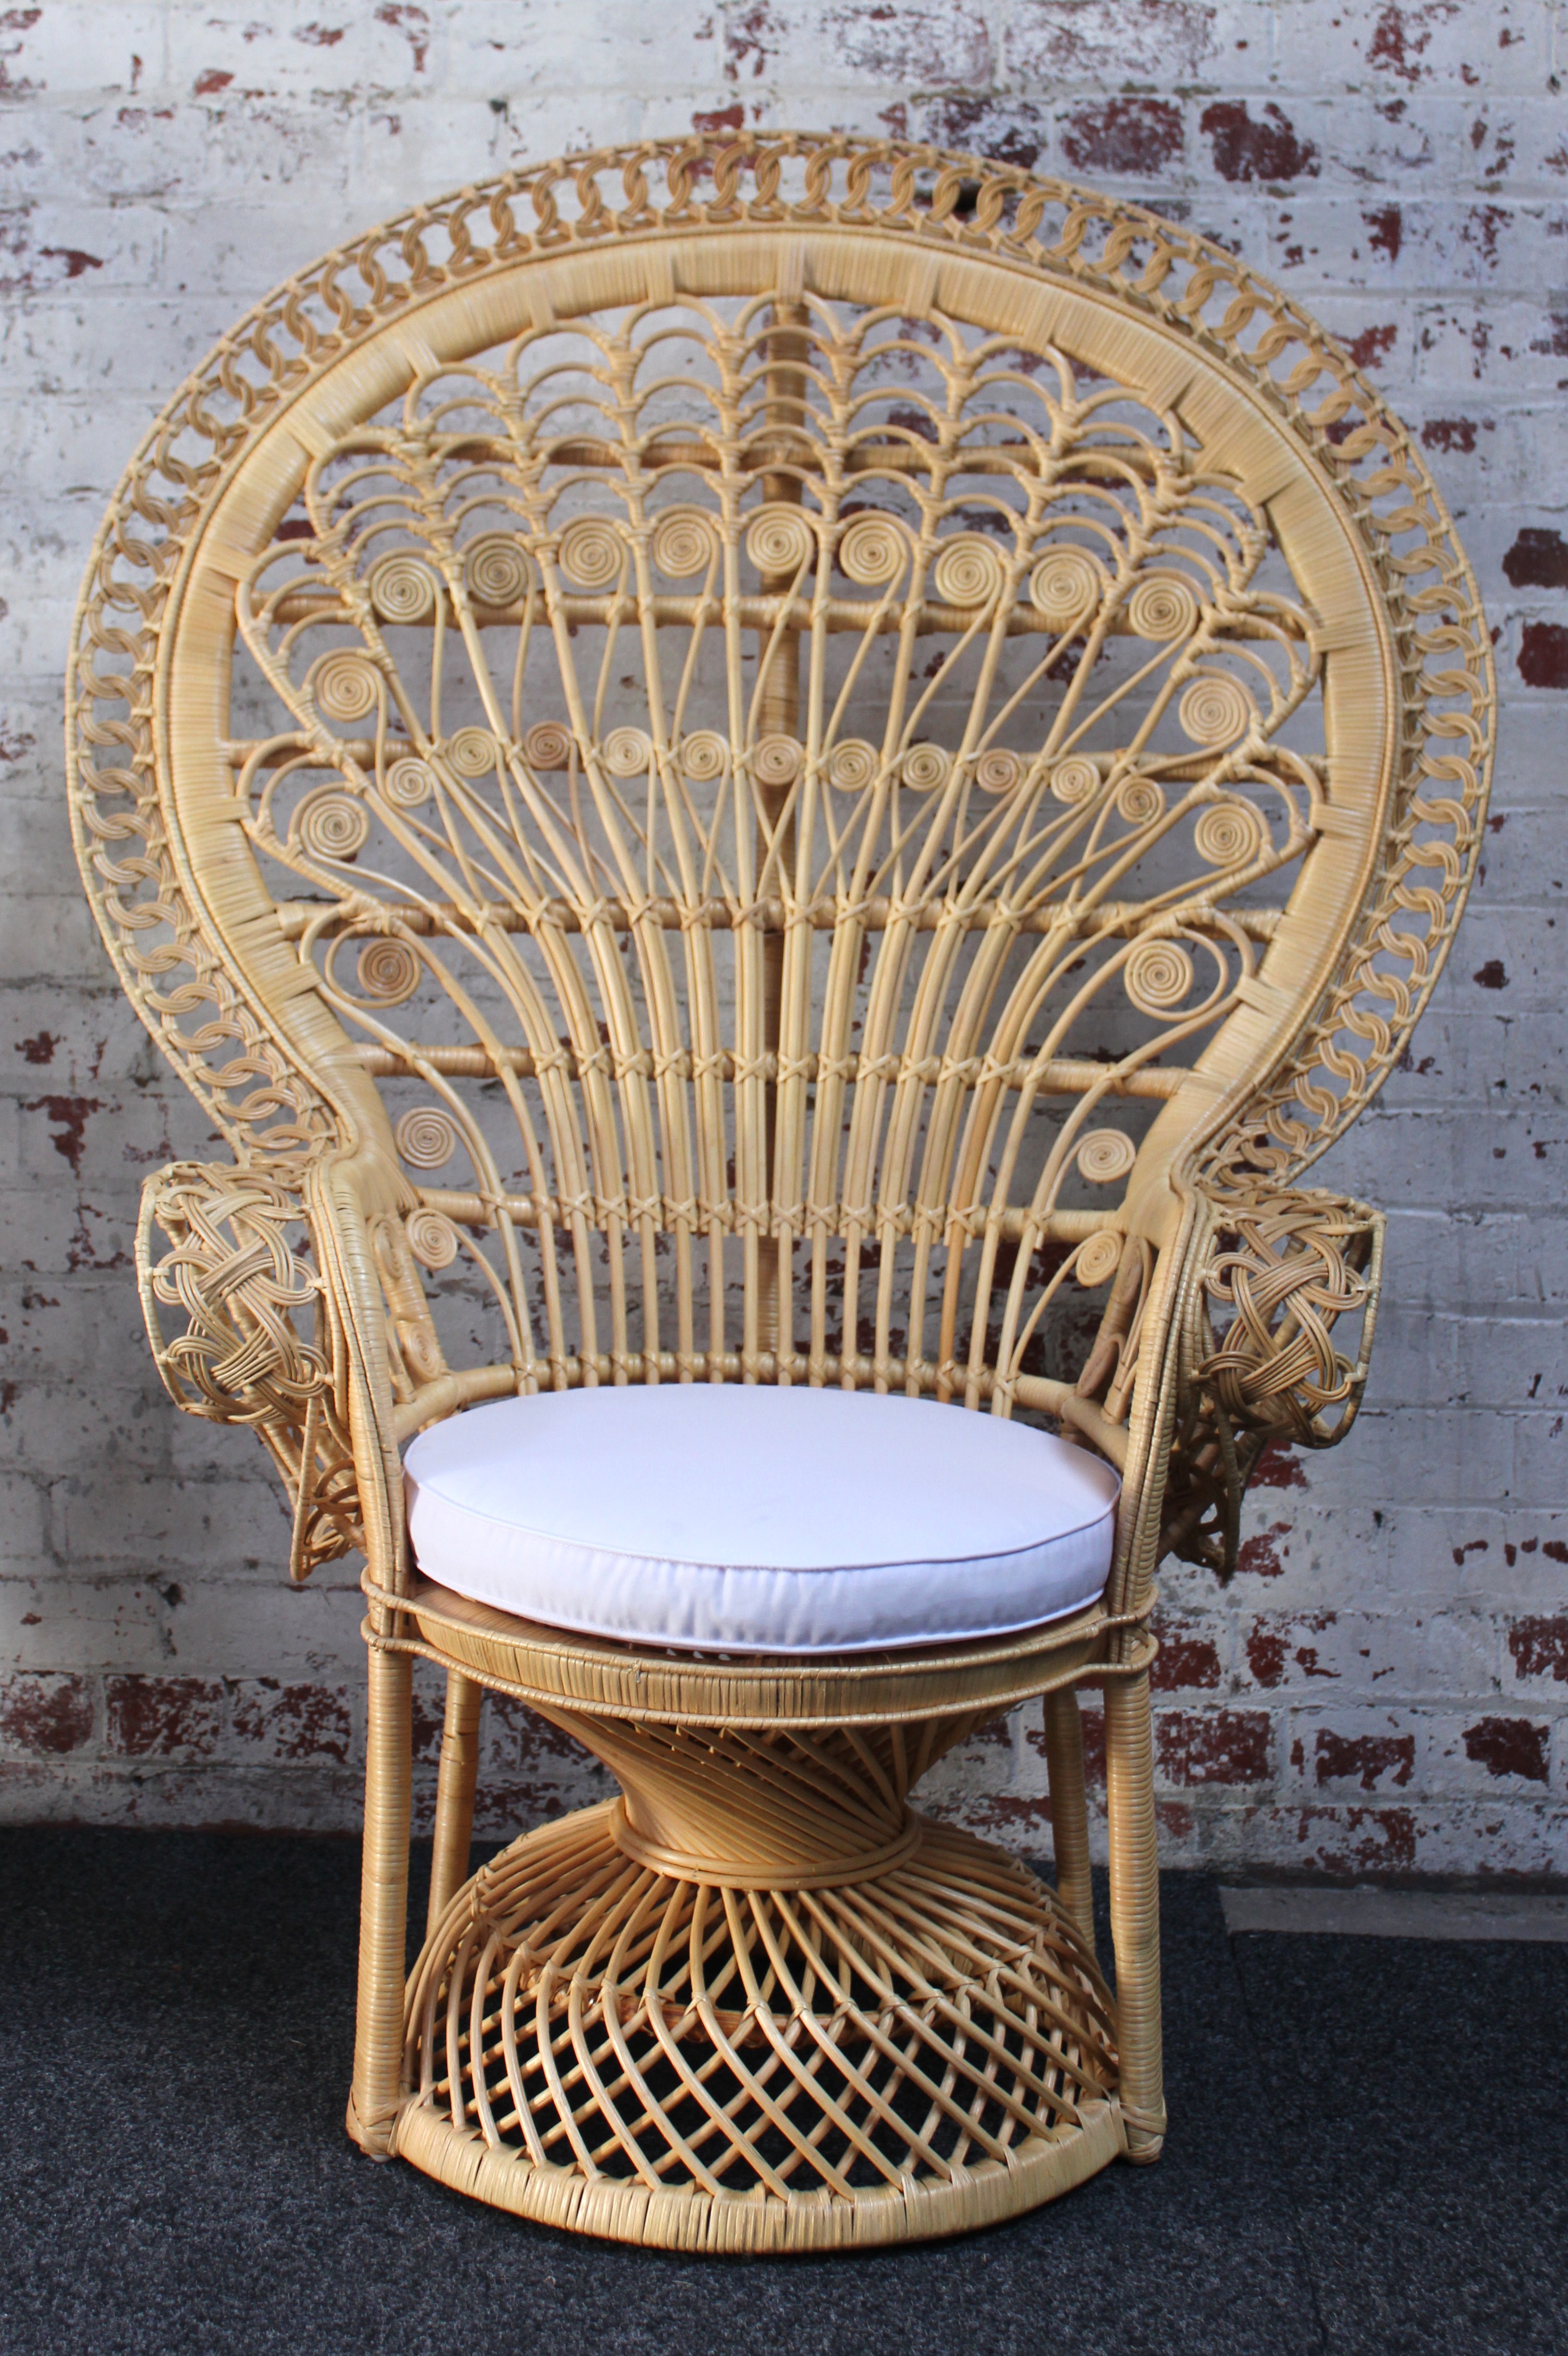 The Largest Producer Of Wicker Furniture In The Us Was Heywood